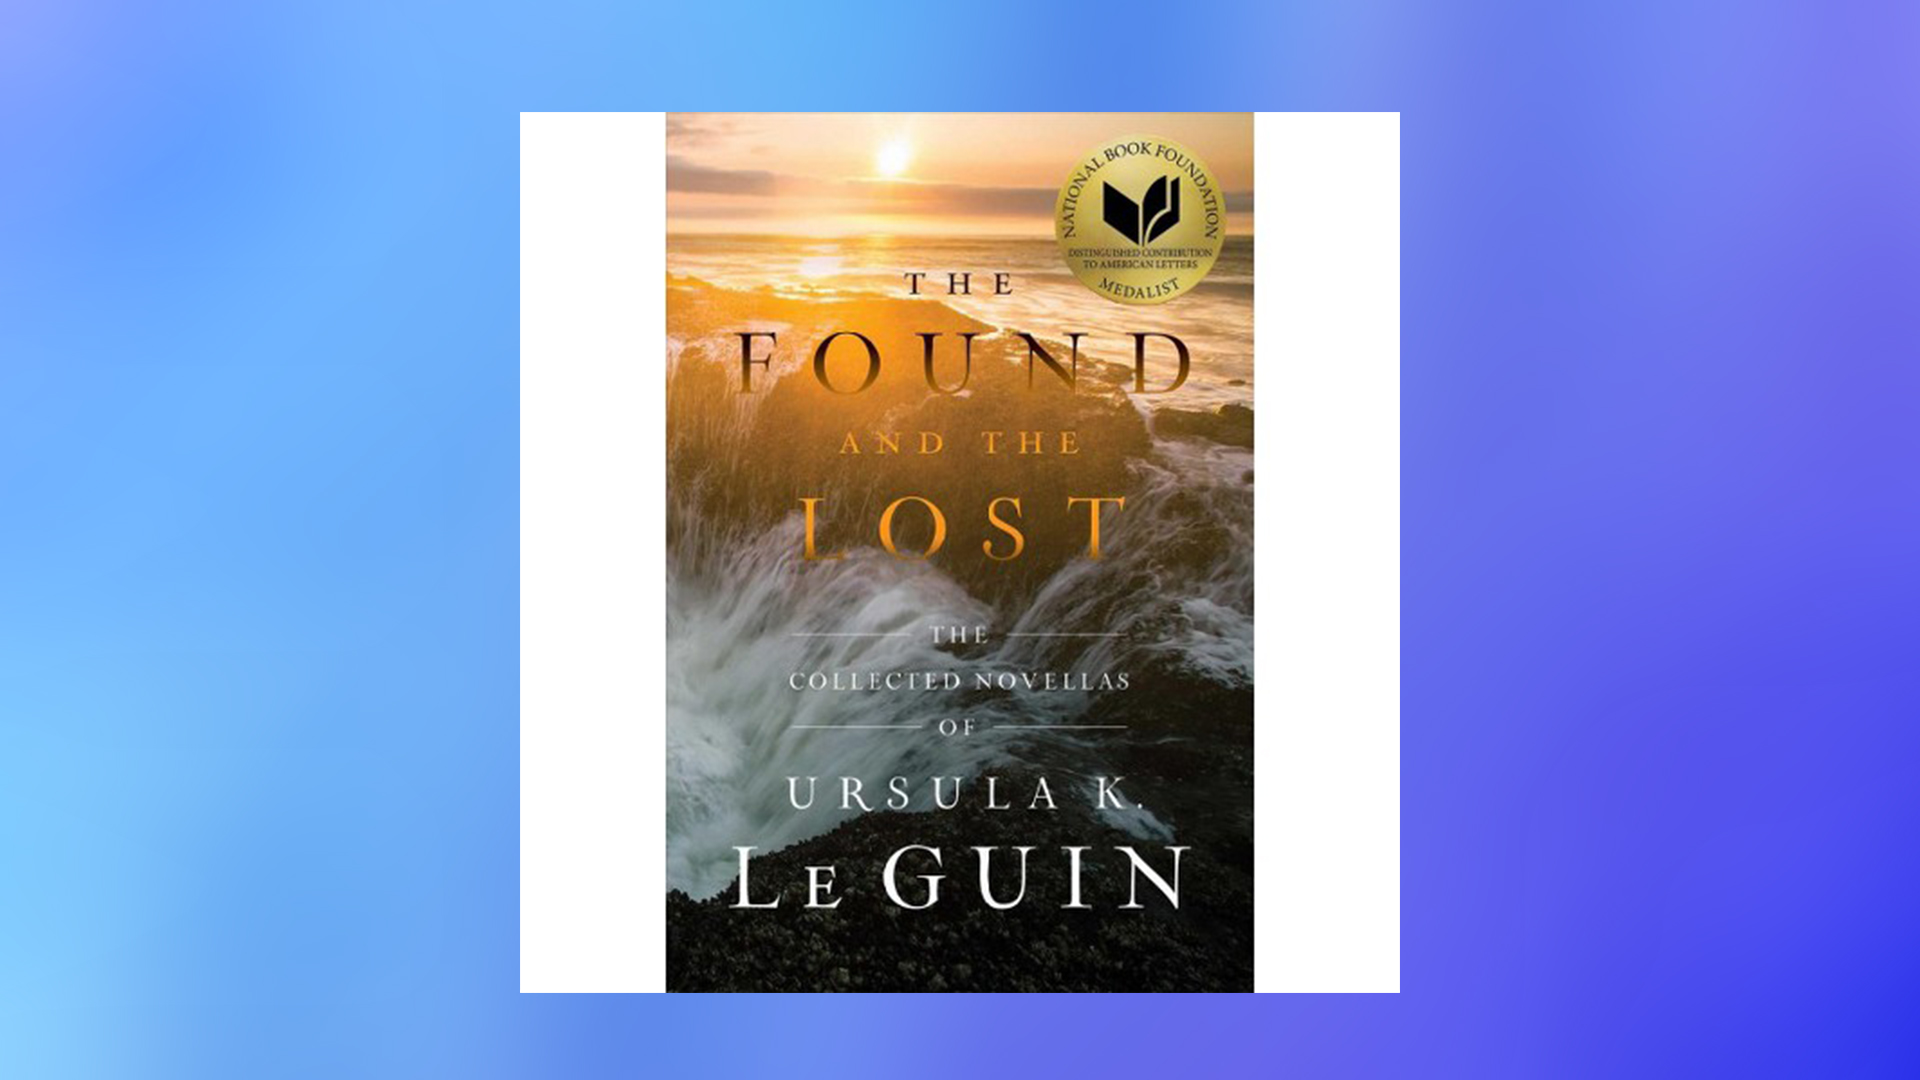 The found and the lost is a very interesting book by Ursula K. Le Guin. Stop, don't talk to me! Loser, lame boy, wannabe. Totally!